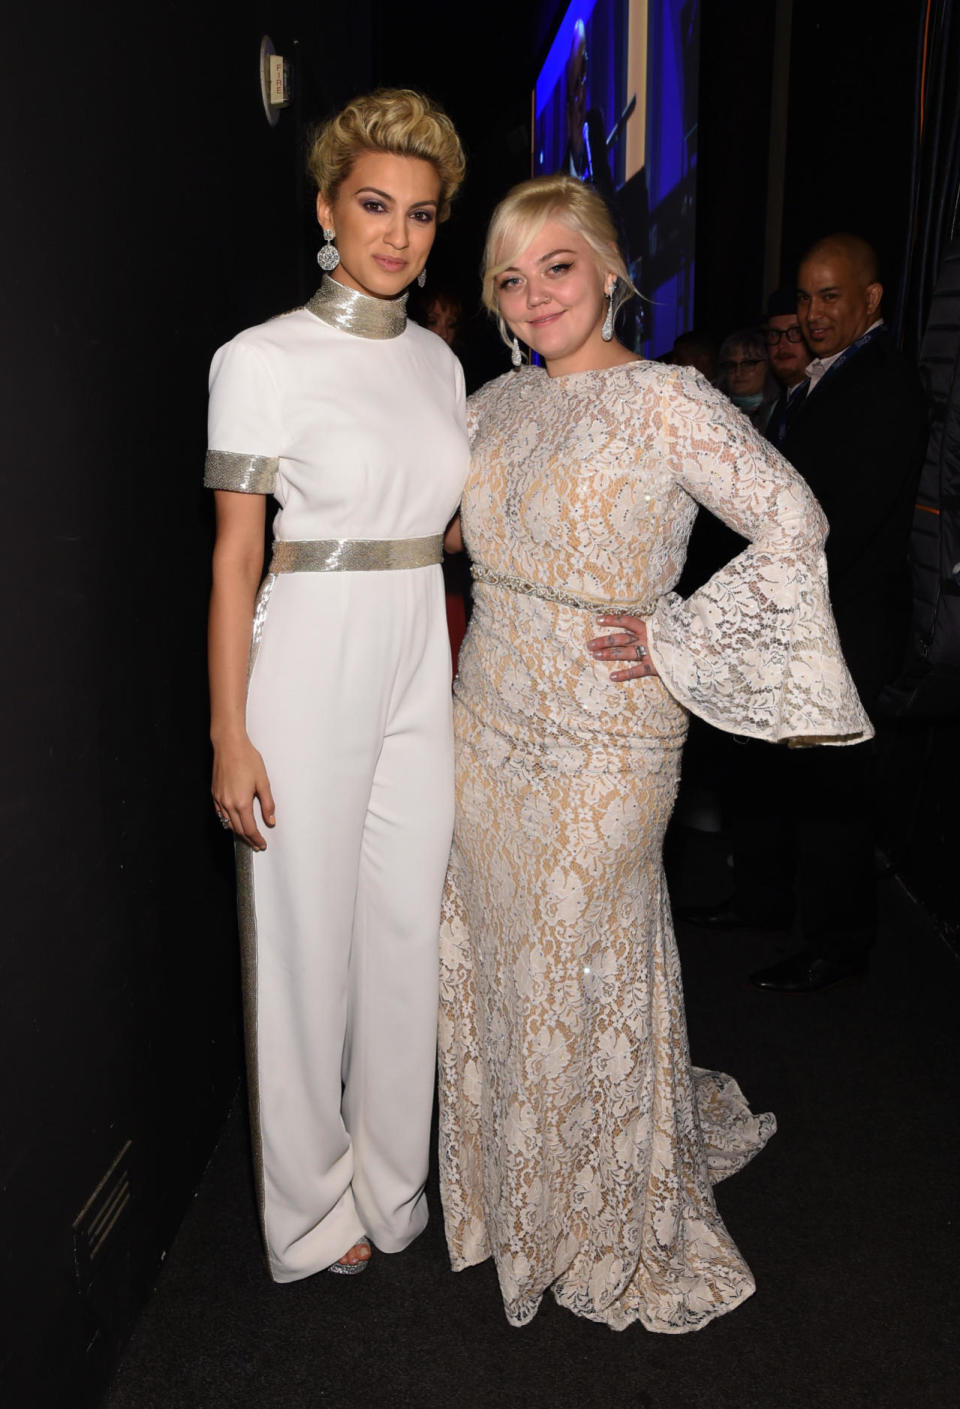 Tori Kelly and Elle King at Clive Davis’s Pre-Grammy party. 